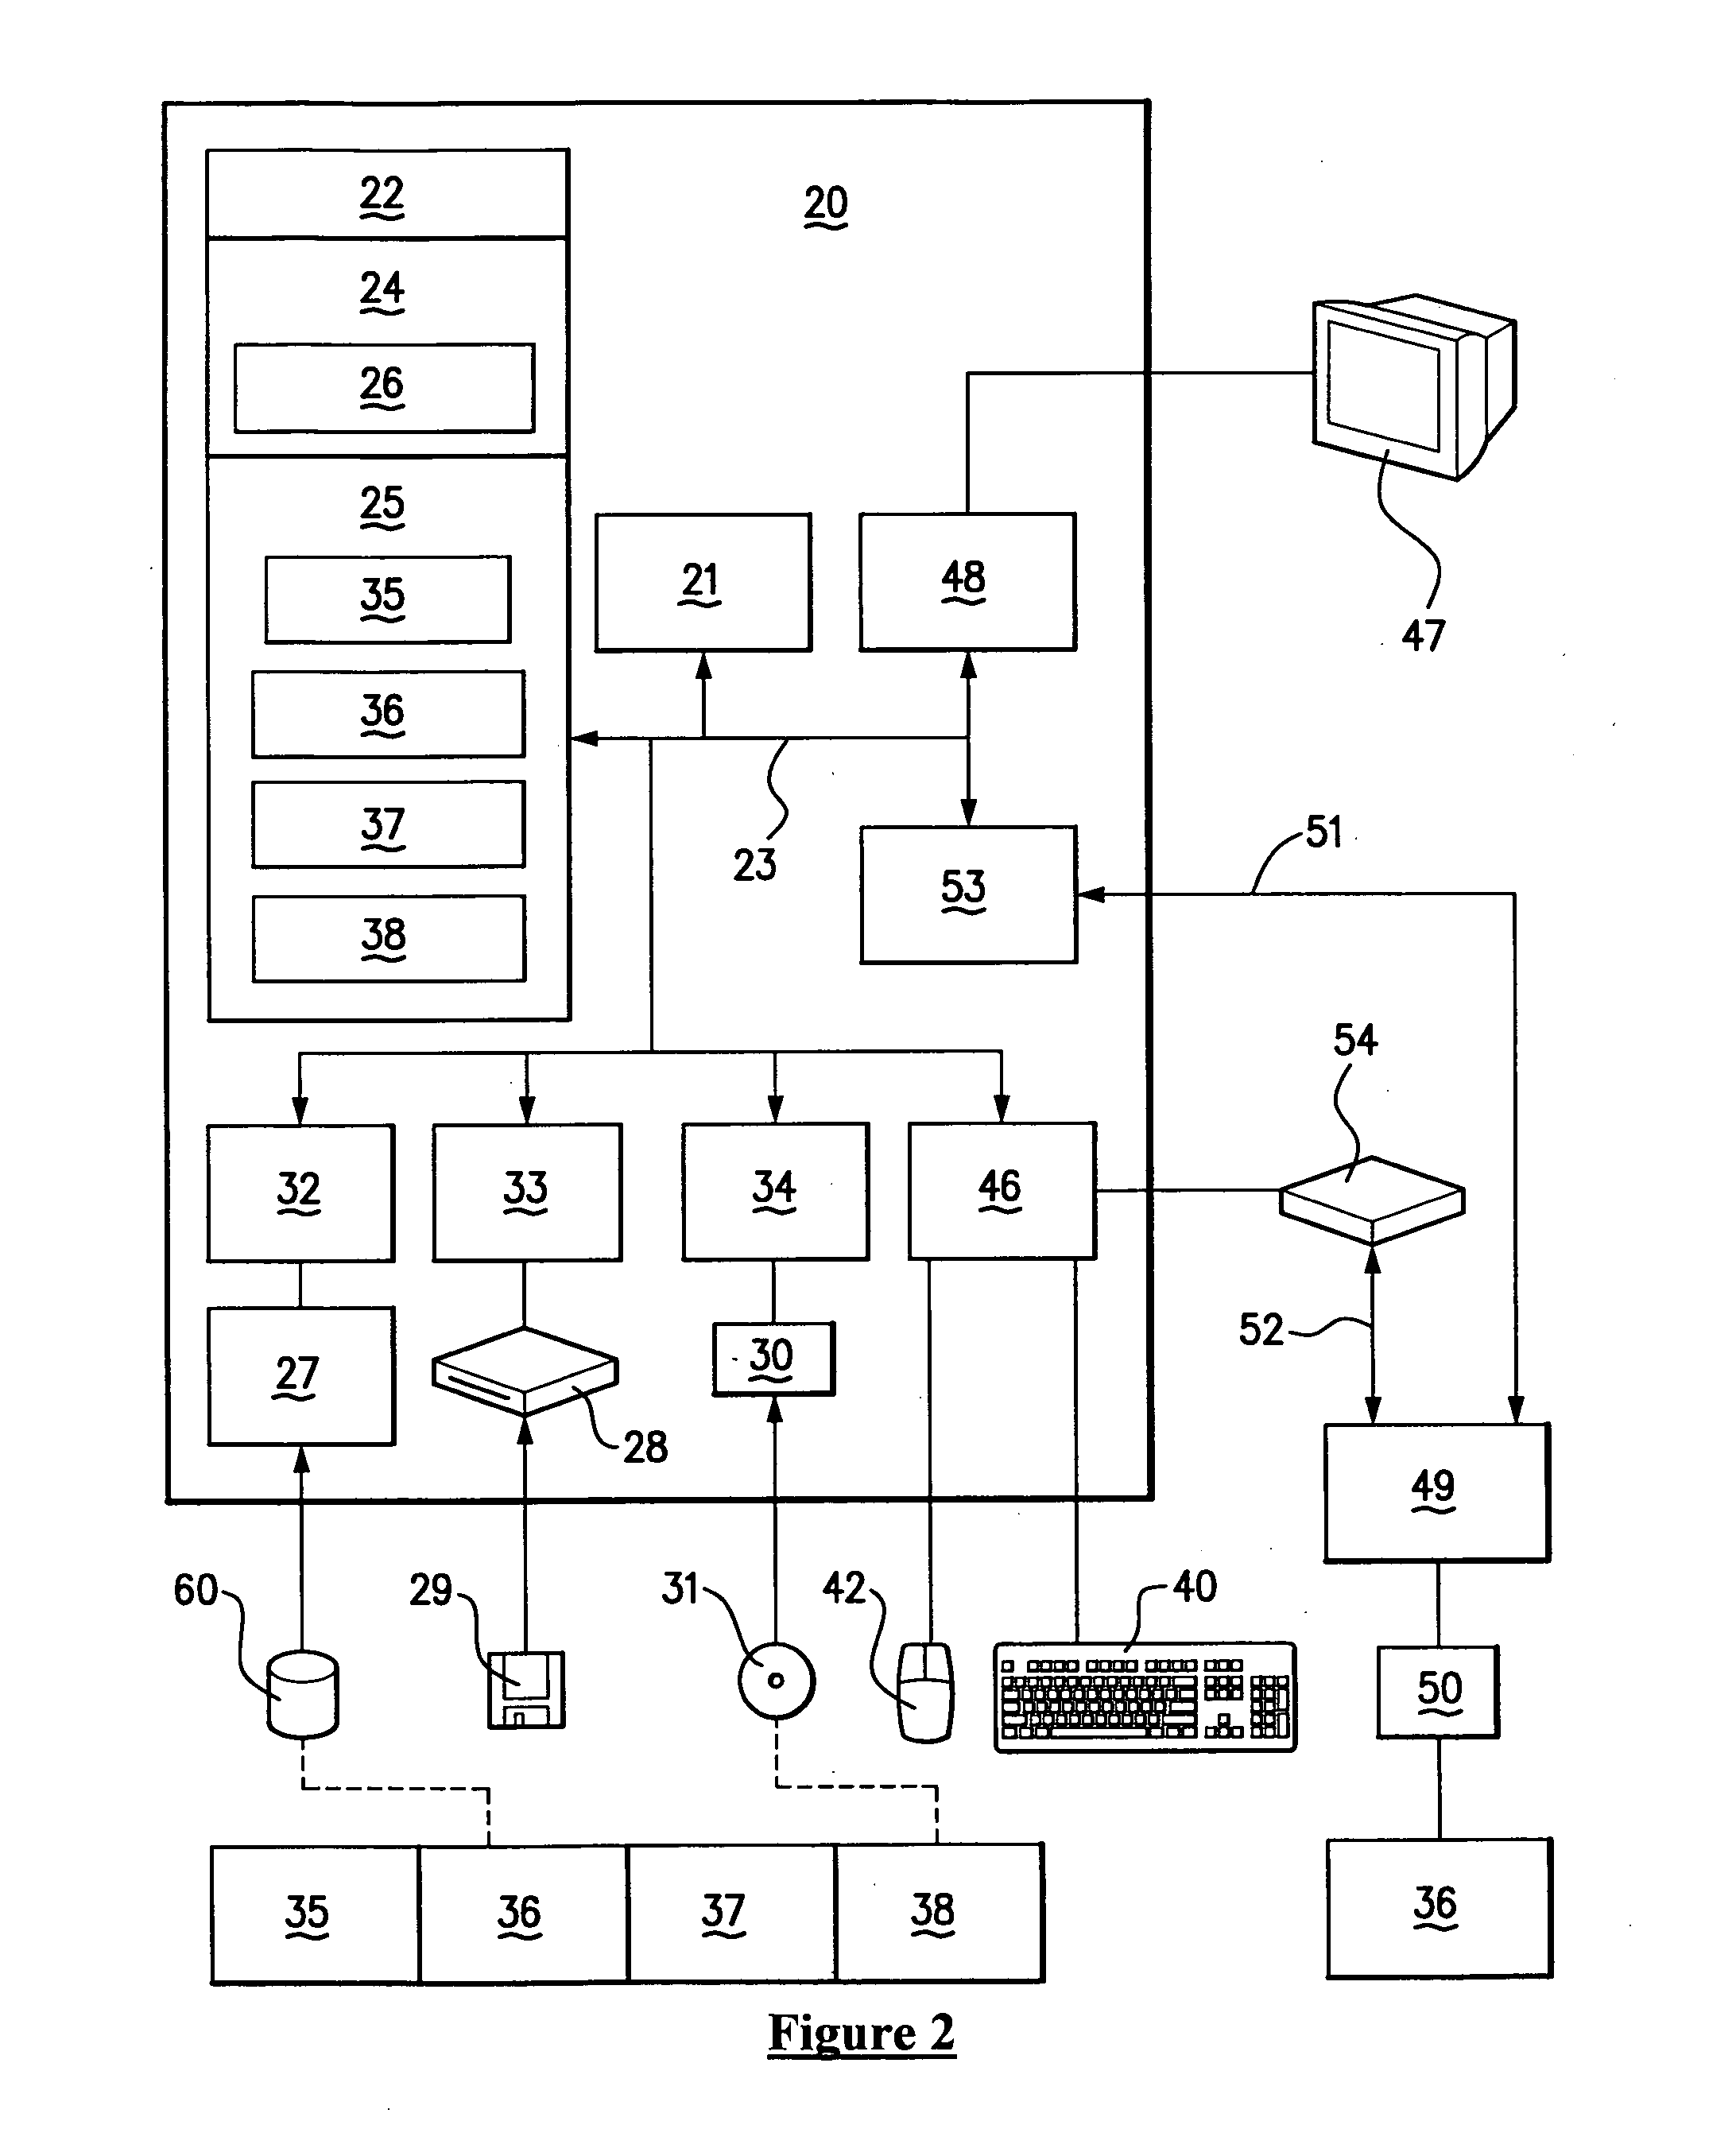 Resource supply management system and method